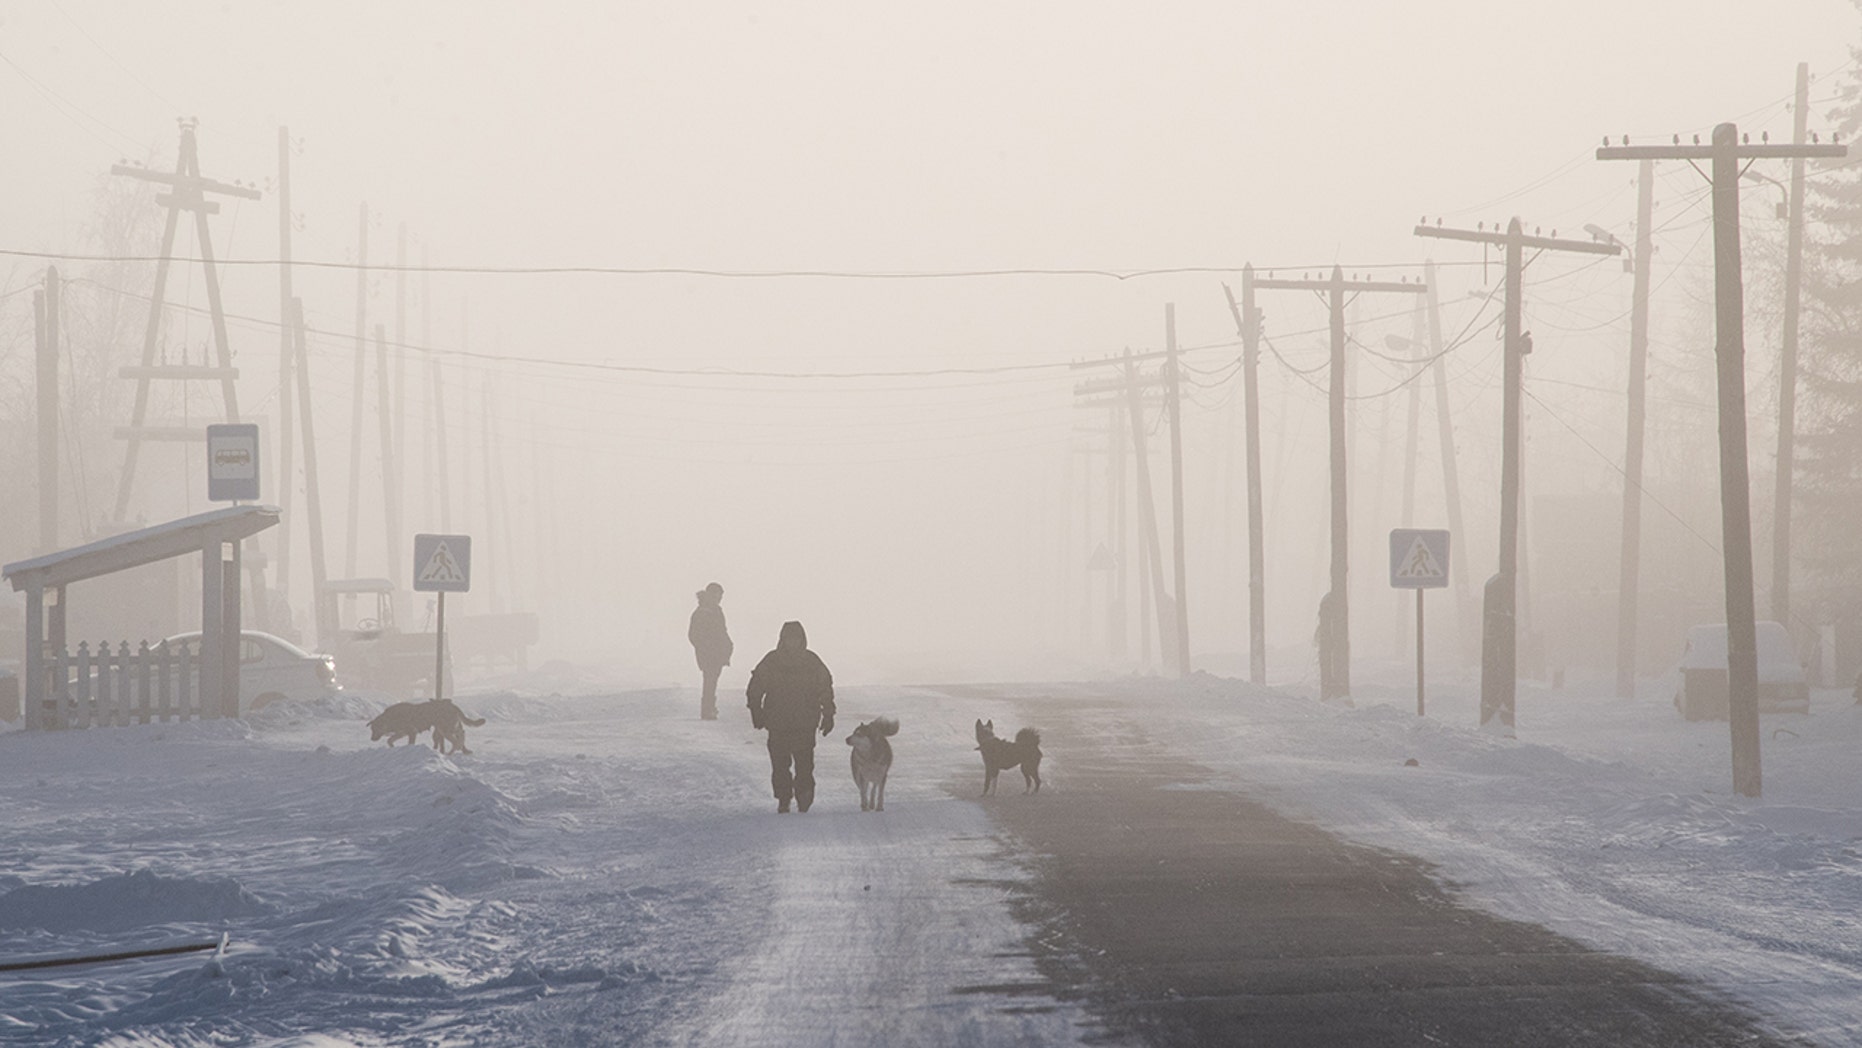 TOPSHOT - A man is surrounded by dogs as he walks on the main street of the settlement of Oy, some 70 km south of Yakutsk, with the air temperature at about minus 41 degrees Celsius, on November 27, 2018. (Photo by Mladen ANTONOV / AFP) (Photo credit should read MLADEN ANTONOV/AFP/Getty Images)